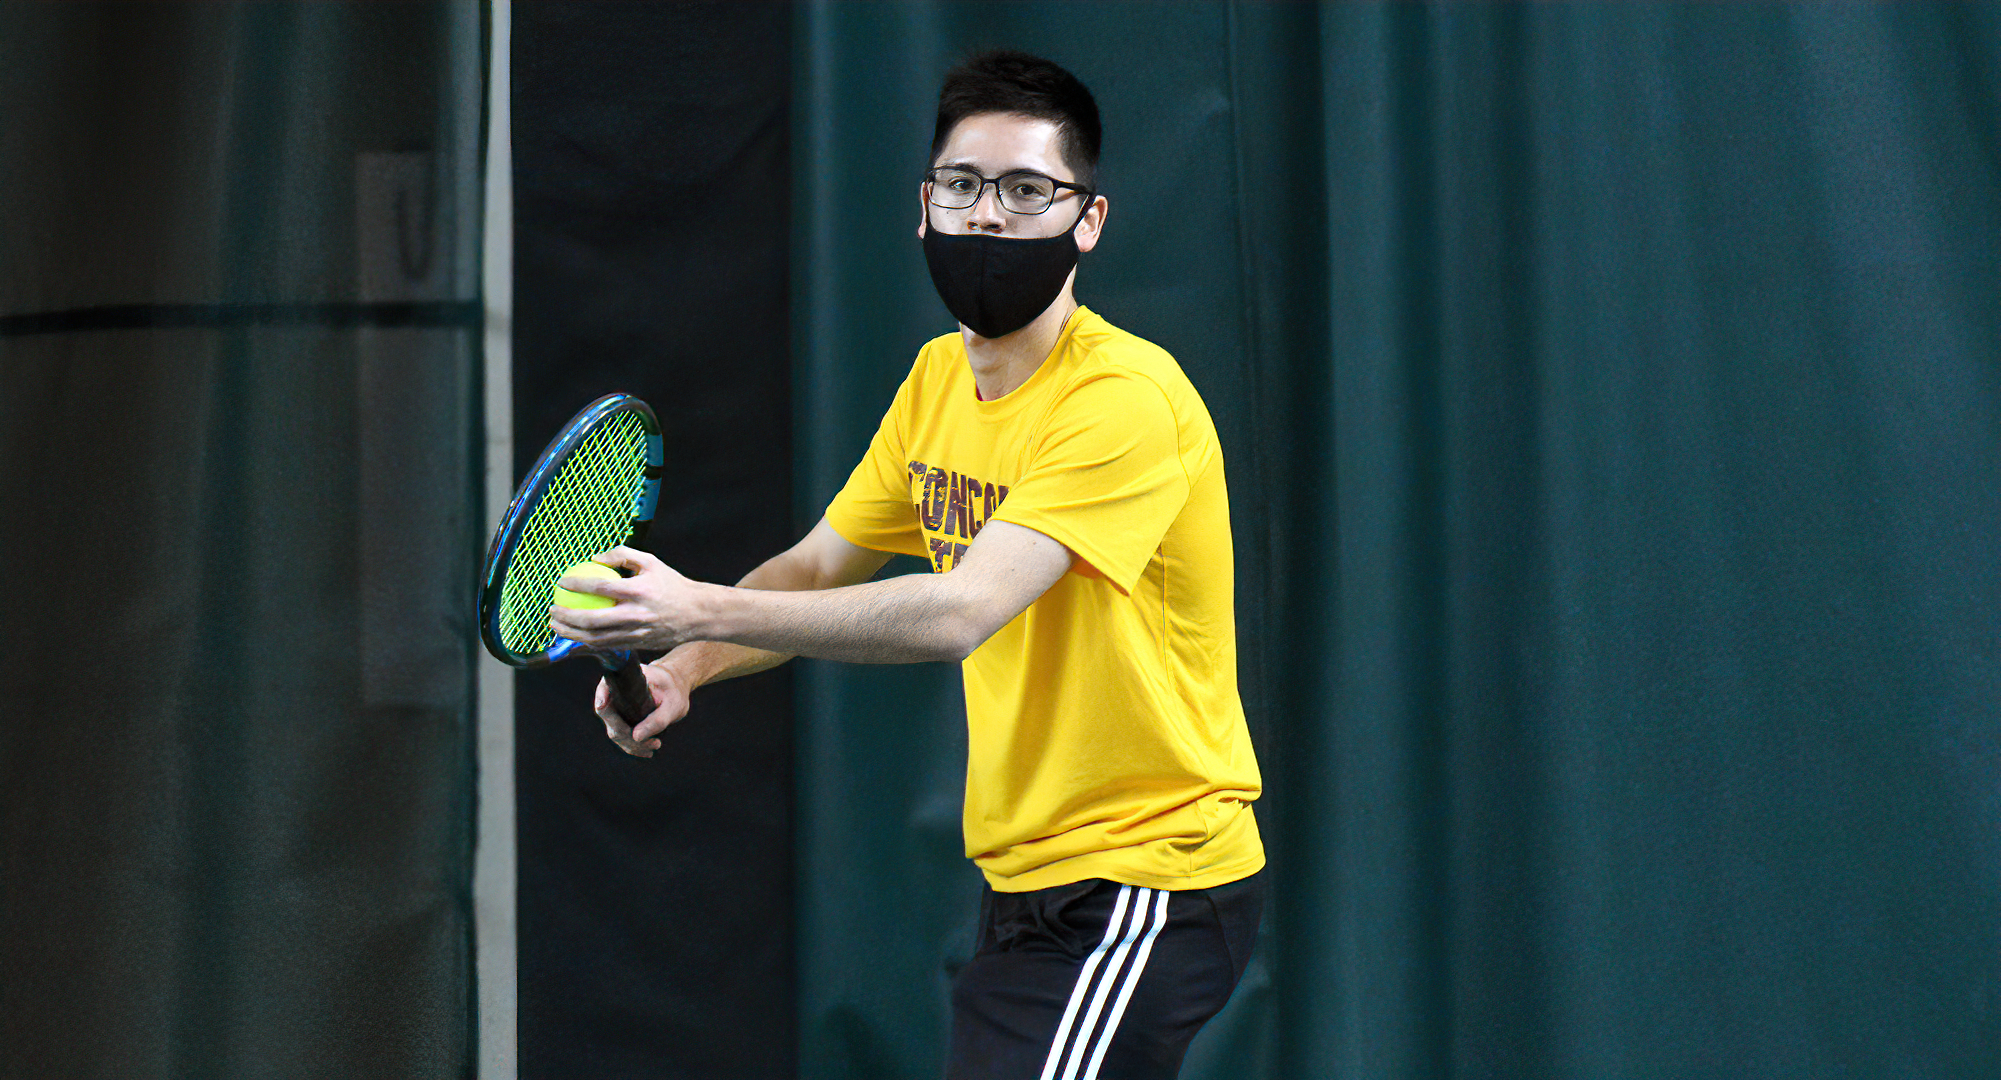 Senior Shota Oda played his final match for the Cobbers when he helped CC take on St. Olaf in Northfield on Saturday.